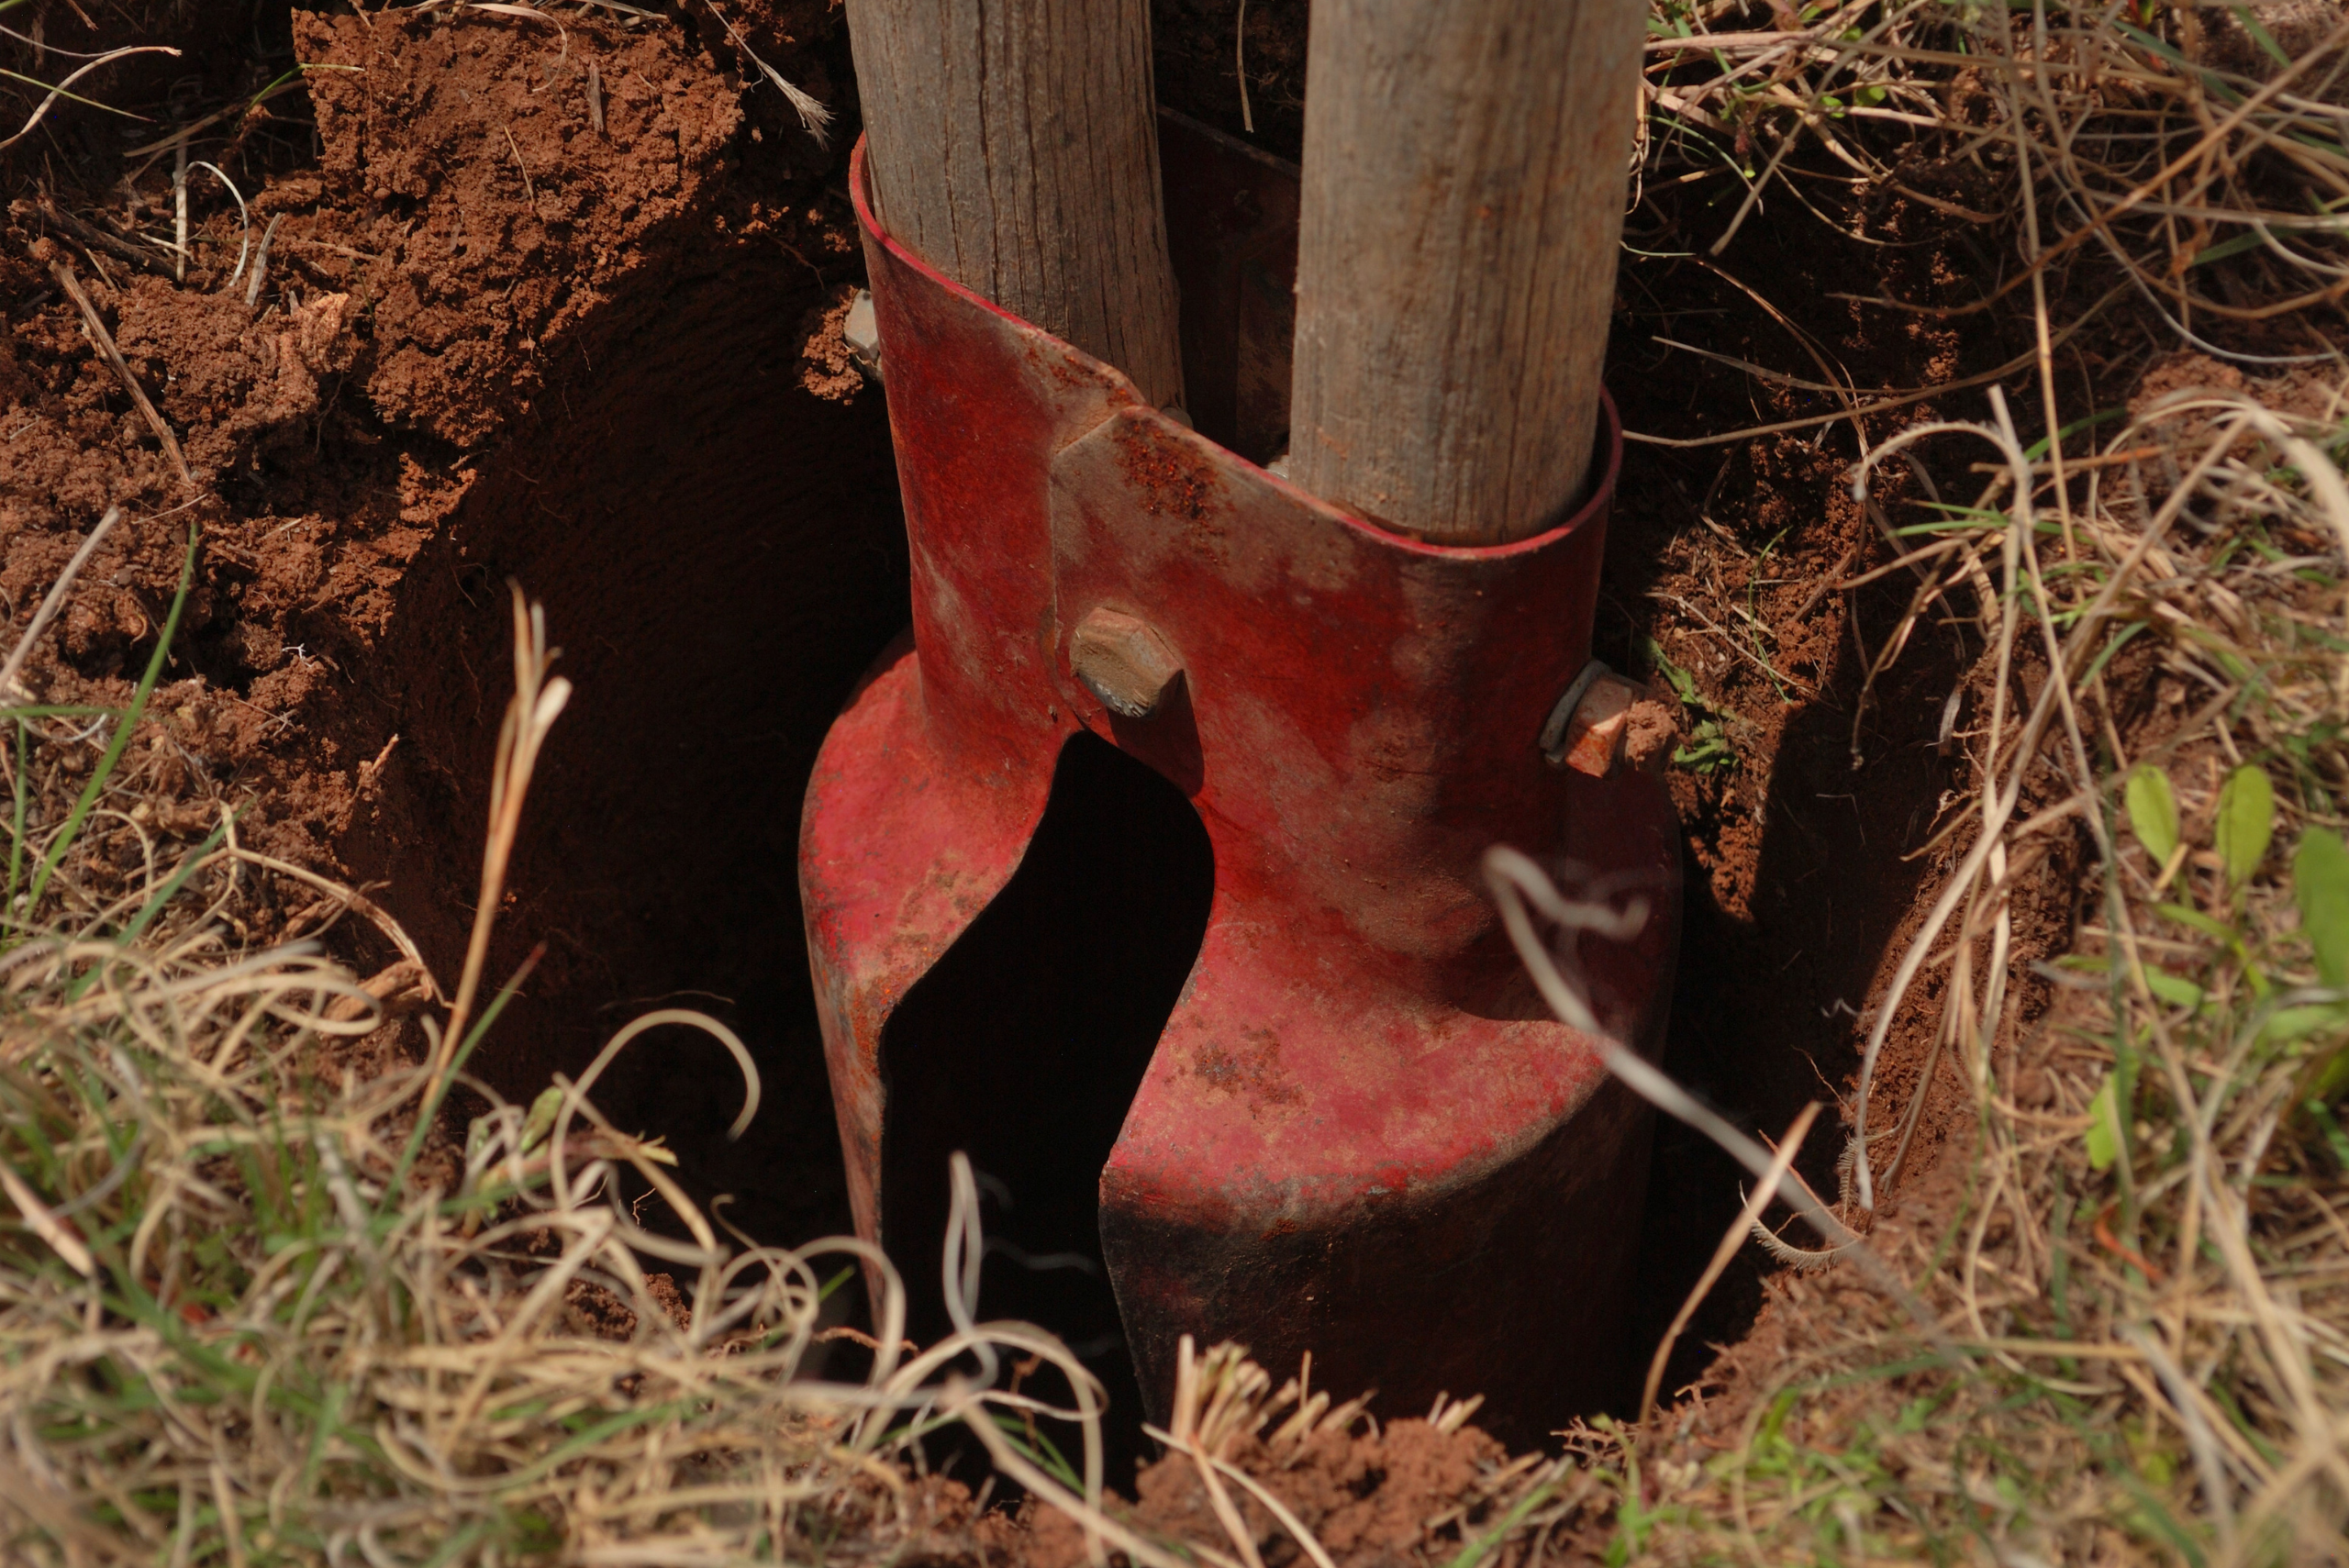 Manual post hole digger with red buckets and wooden handles.